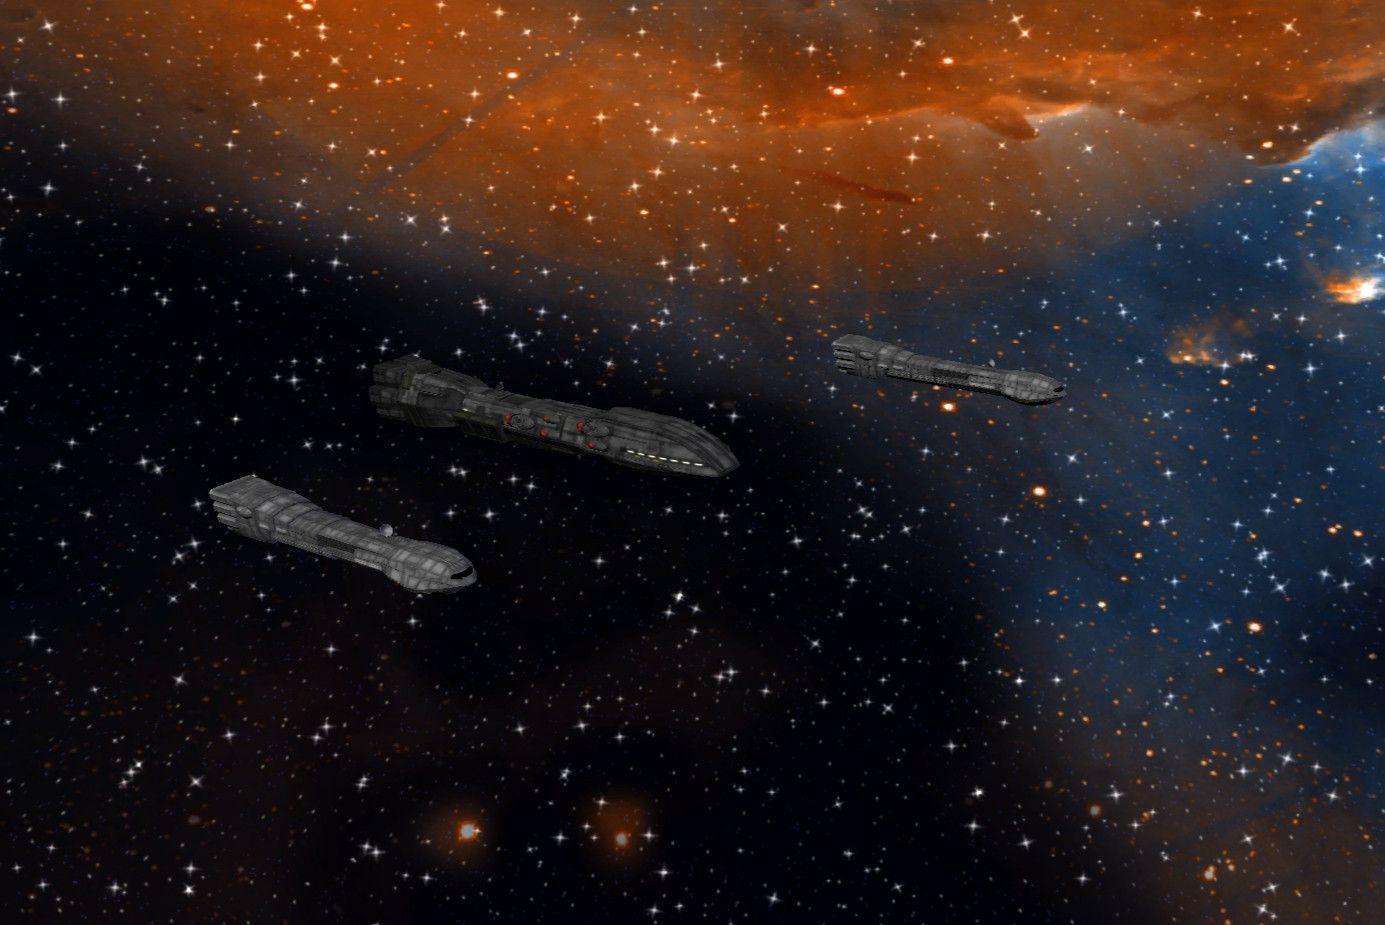 New Space Background image at War Mod for Star Wars